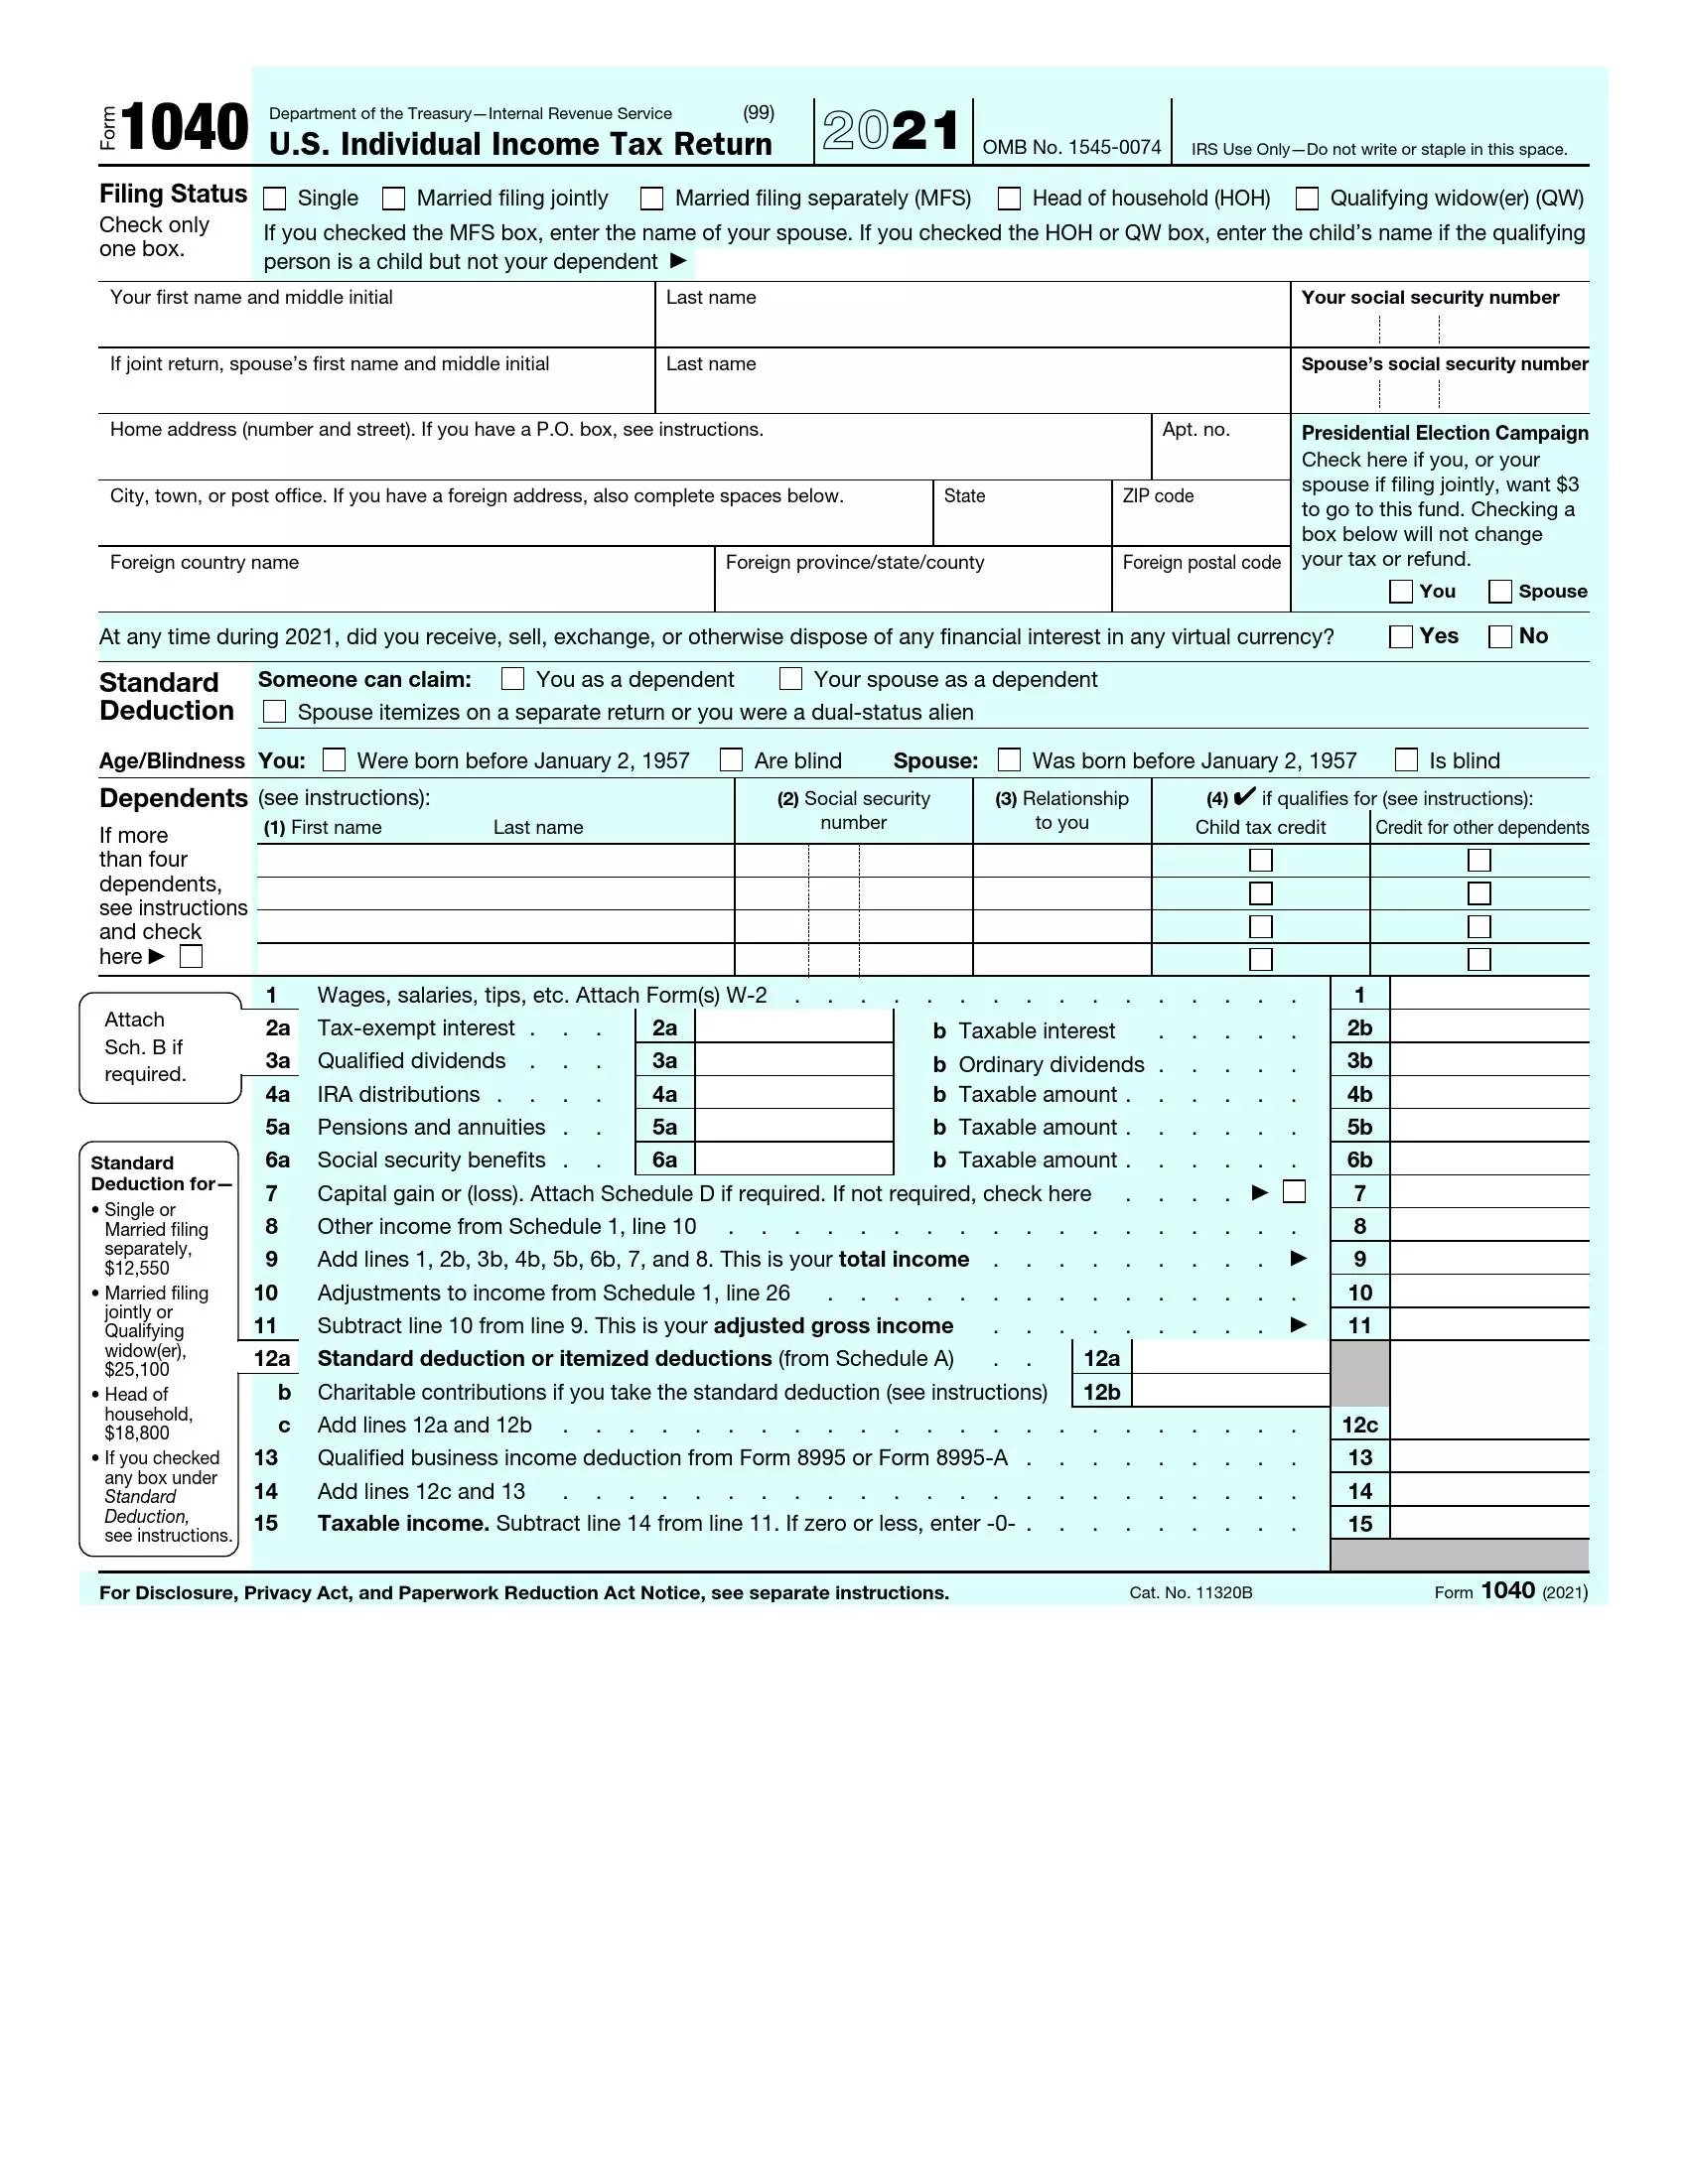 irs form 1040 2021 preview